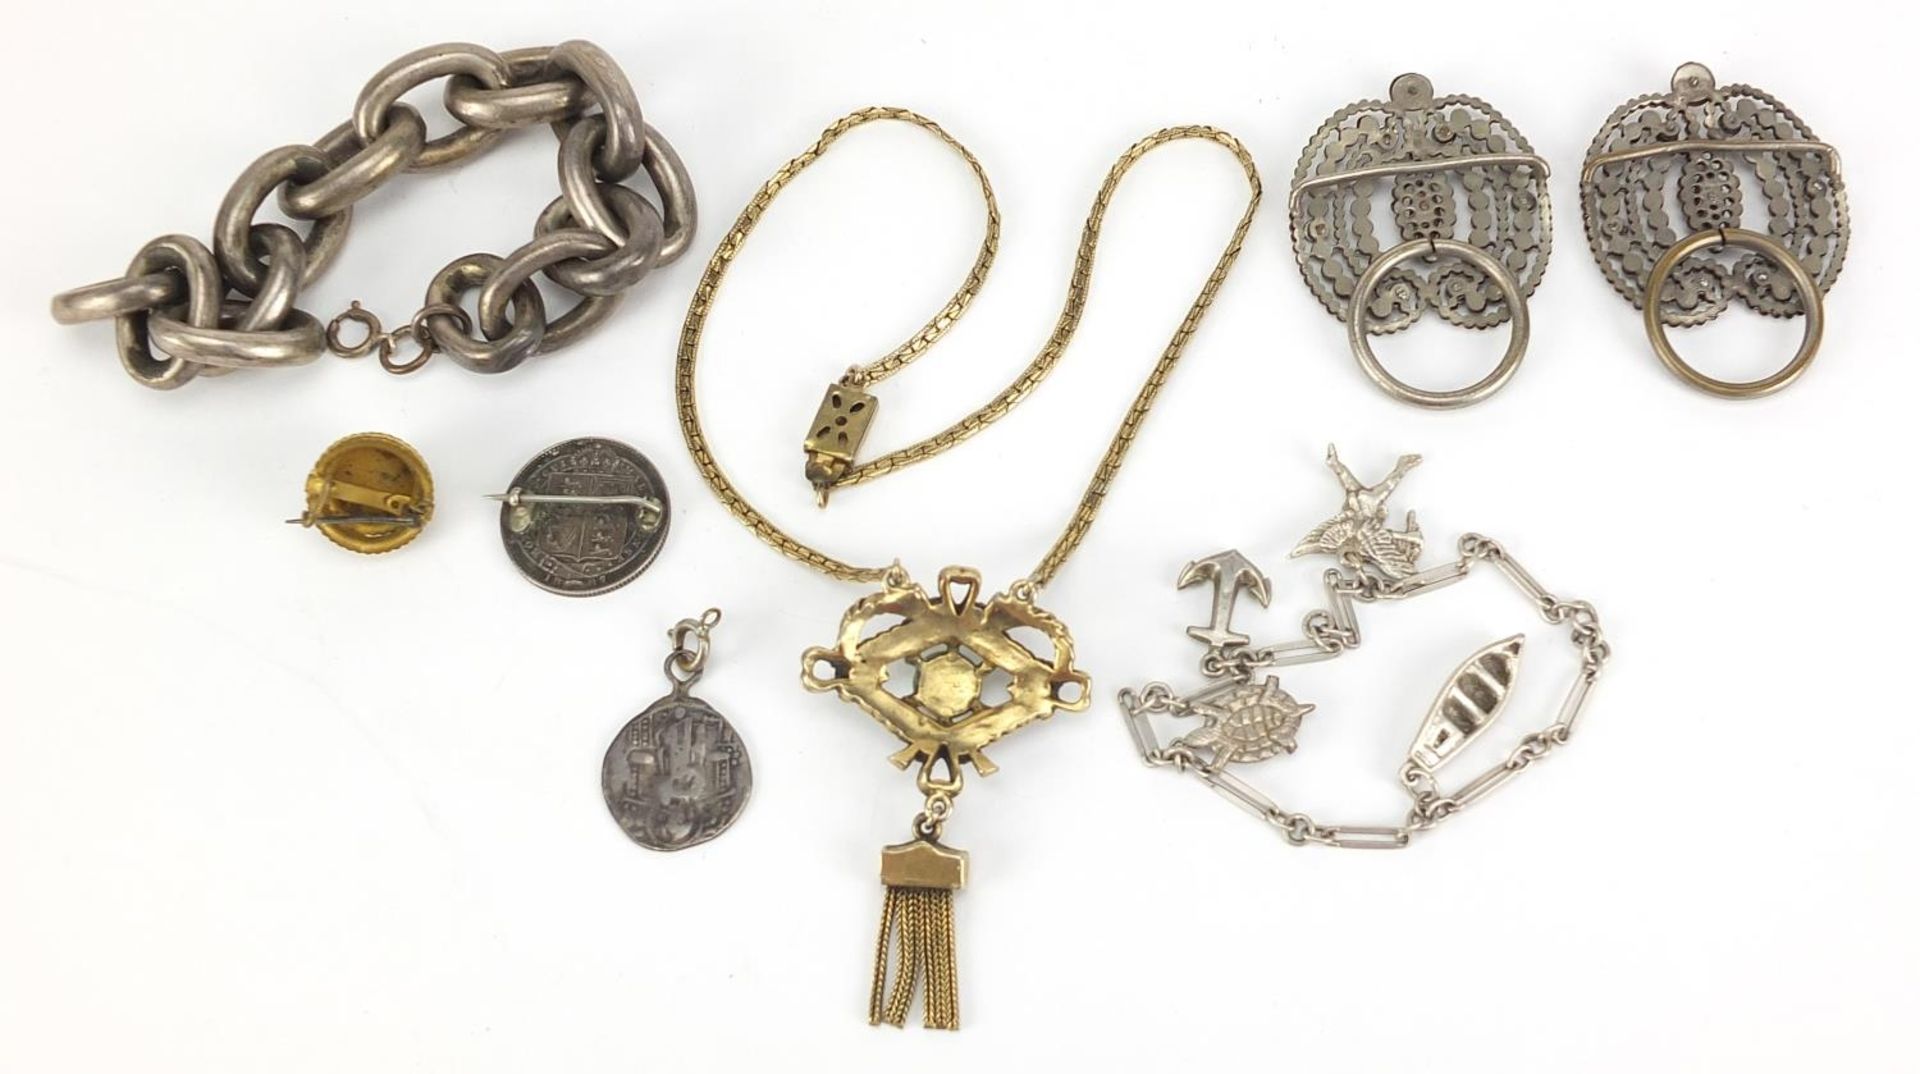 Antique and later jewellery including cut steel, silver charm bracelet, 1887 coin brooch and a large - Image 4 of 4